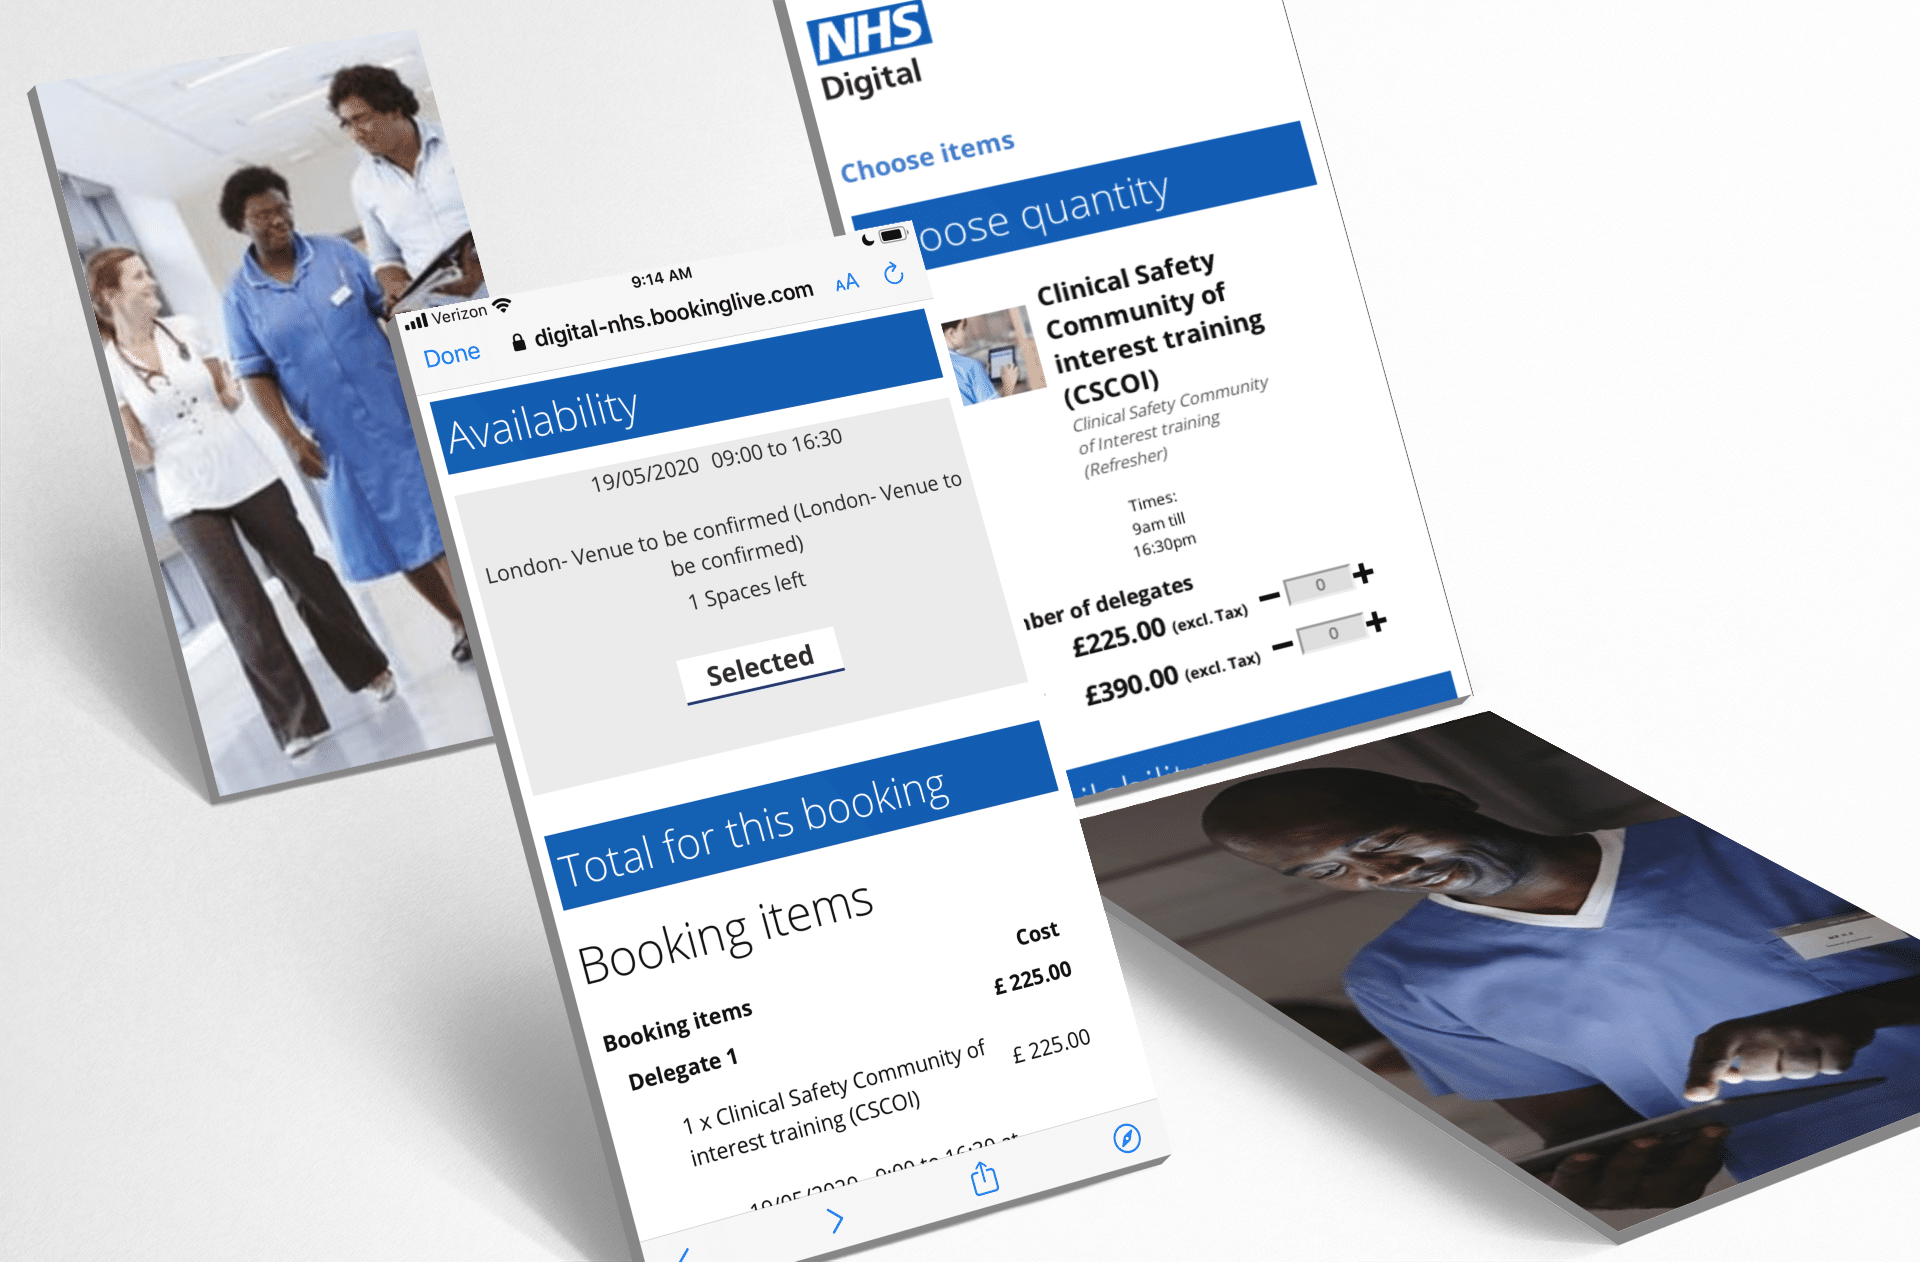 The NHS has steadily been incorporating web-based booking systems